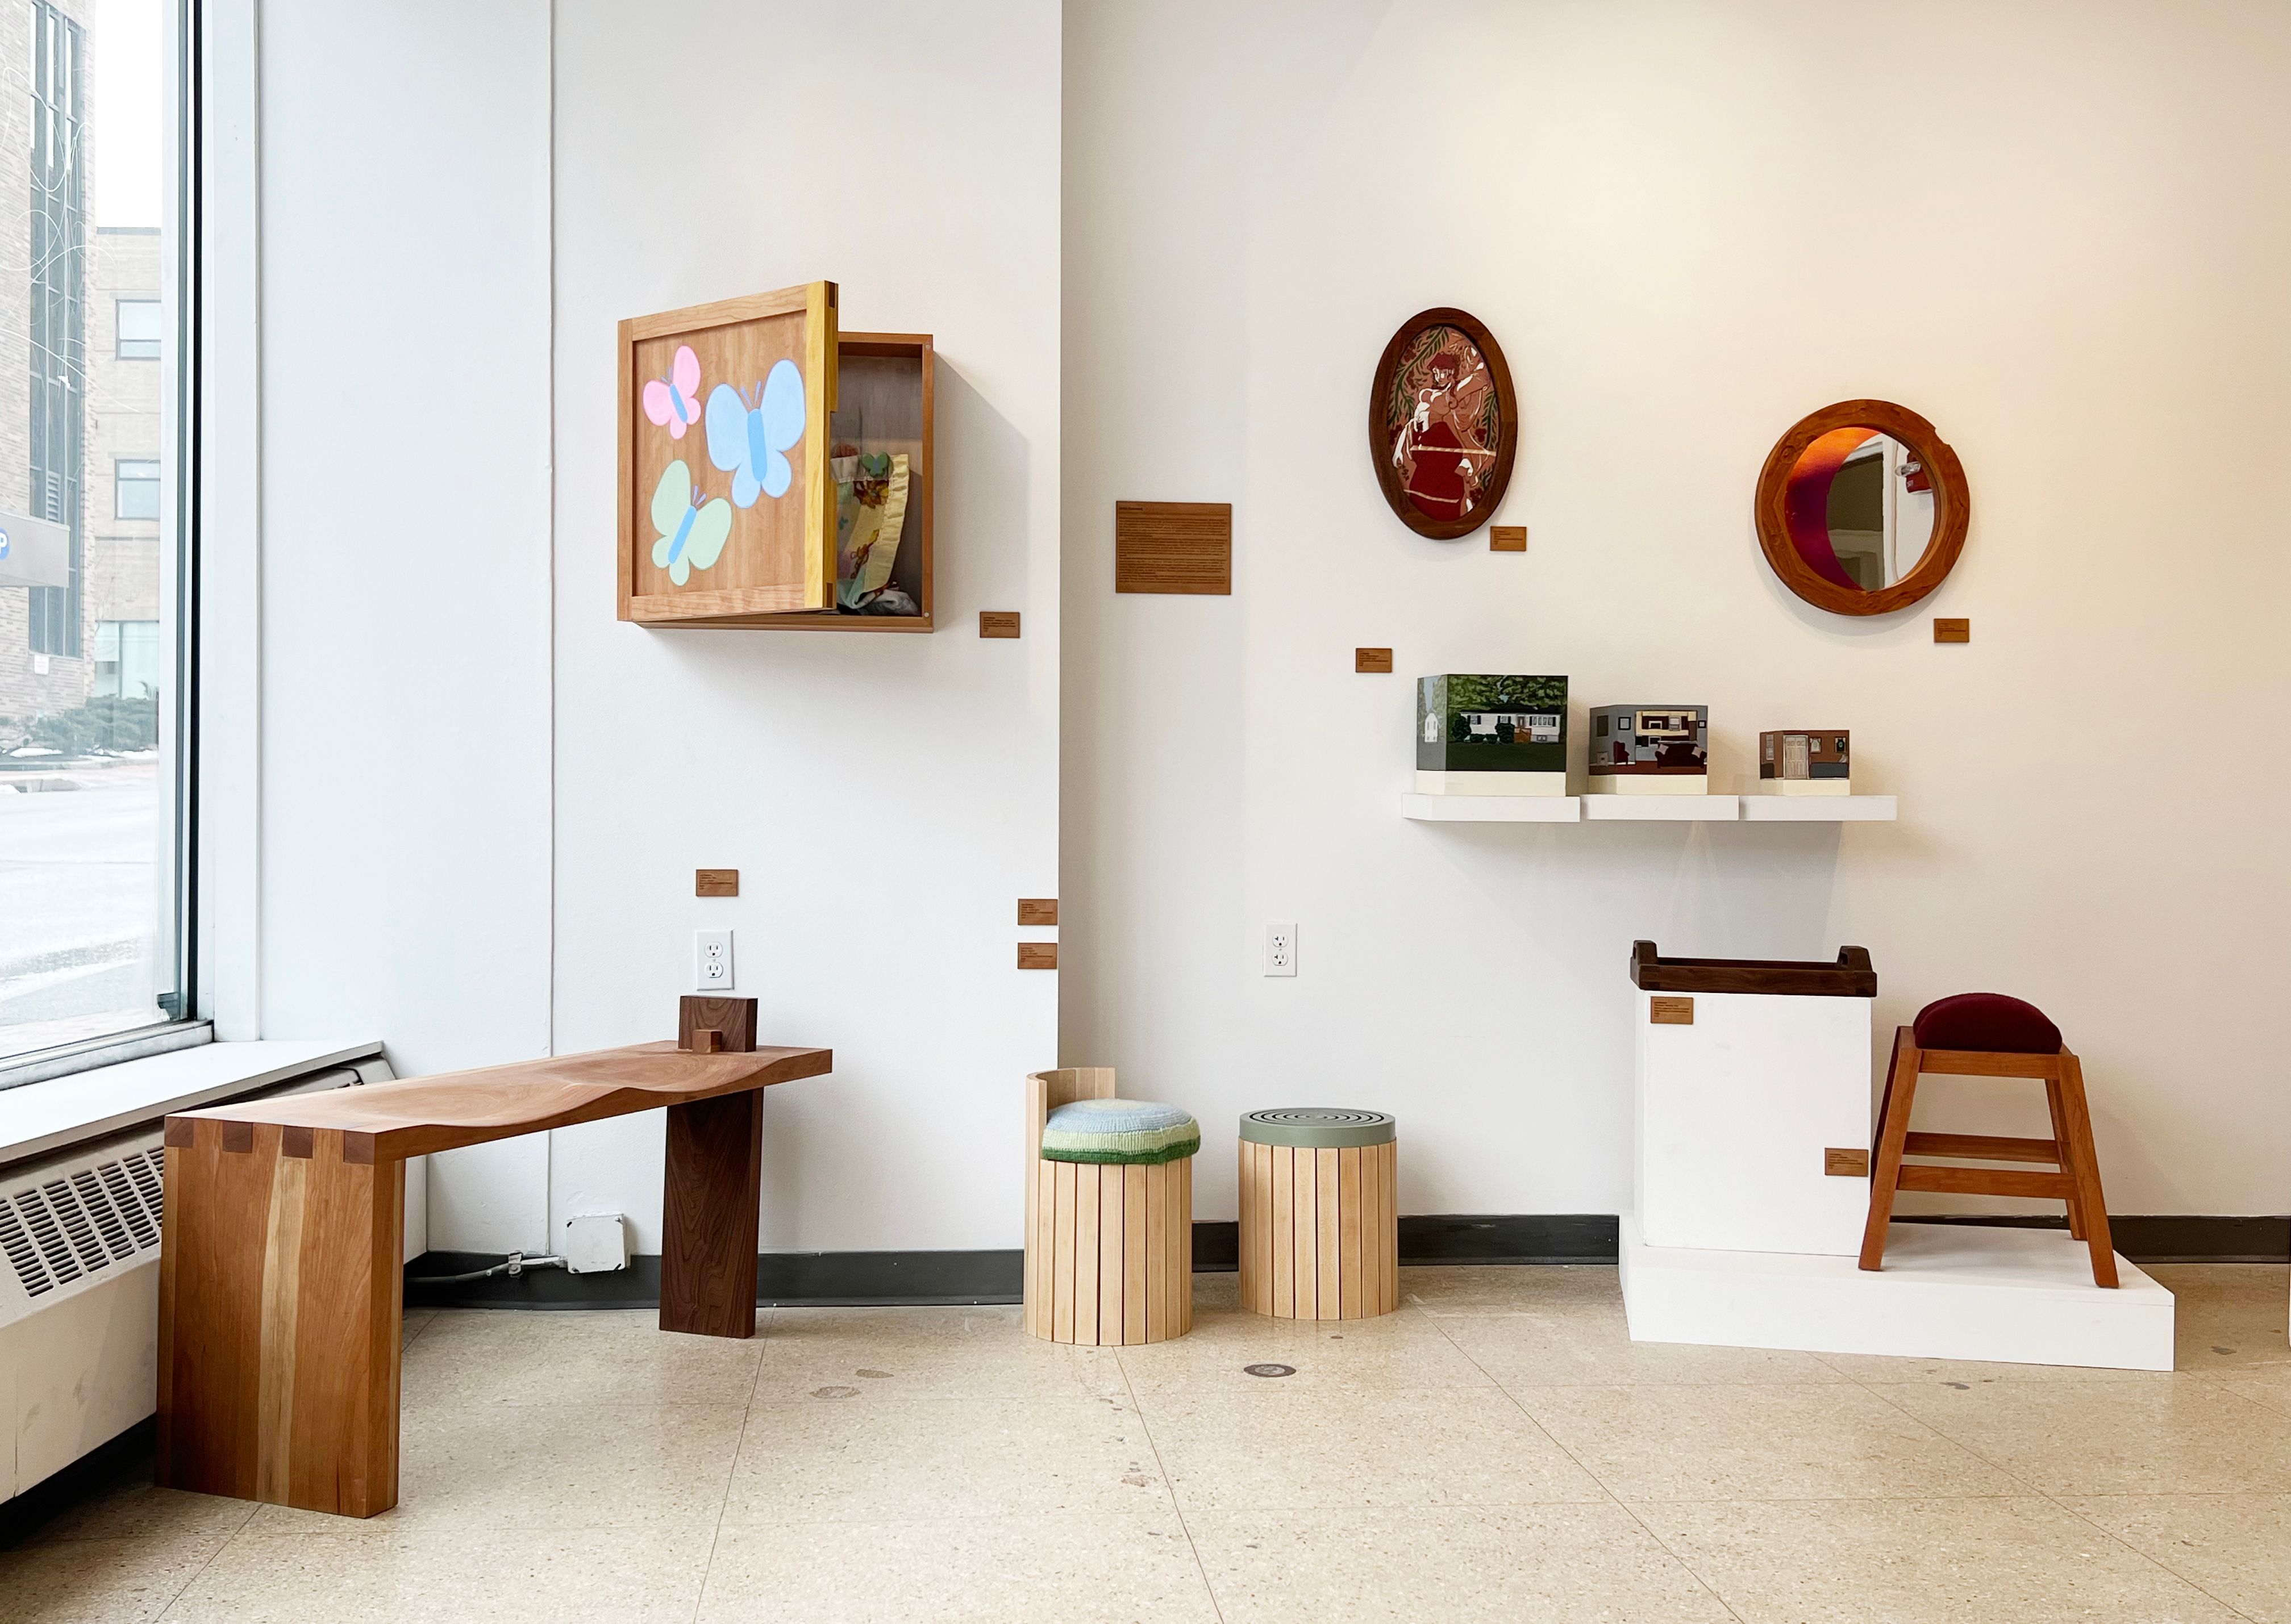 An installation of wooden furniture, including a bench, stools, mirrors, and a cabinet.